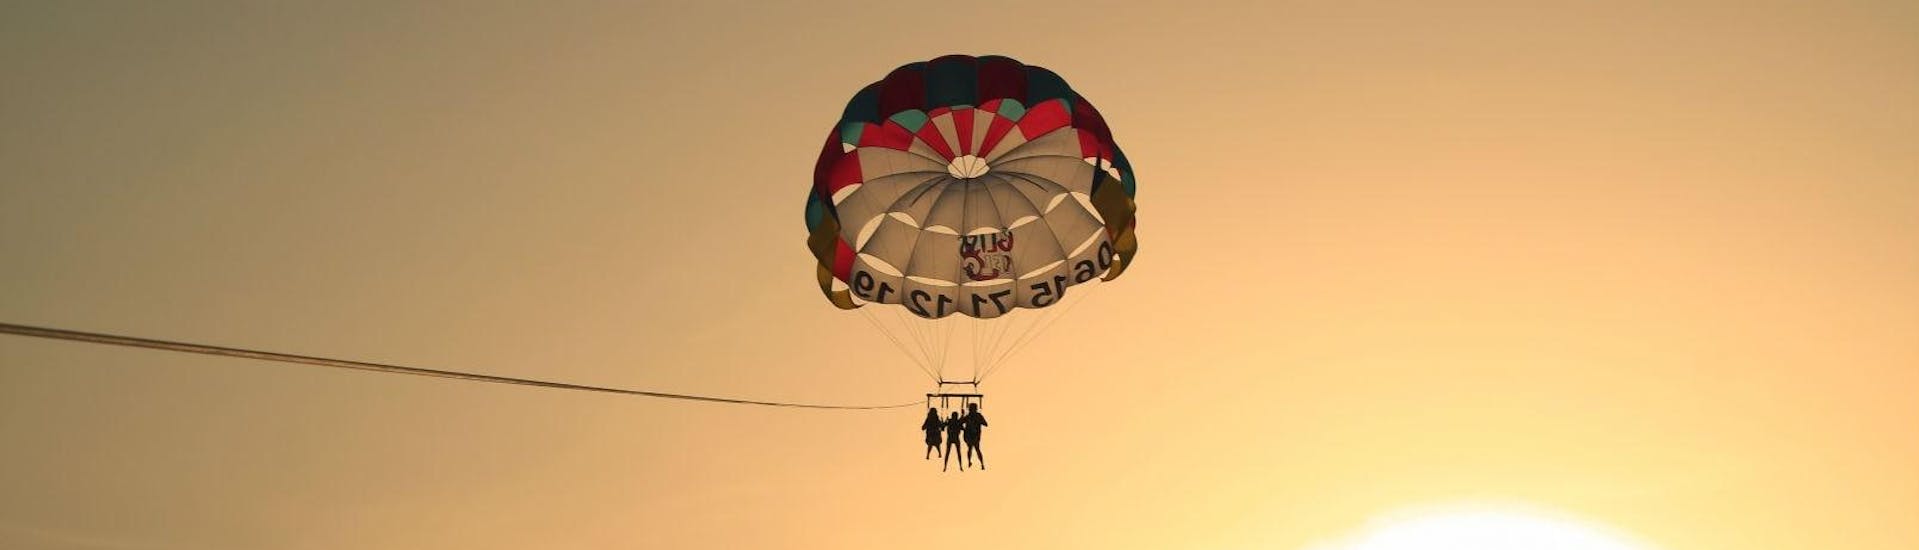 Three people from the watersports company Gliss1Flo parasailing during sunset in Saint-Florent with a view of the coast of North Corsica. 